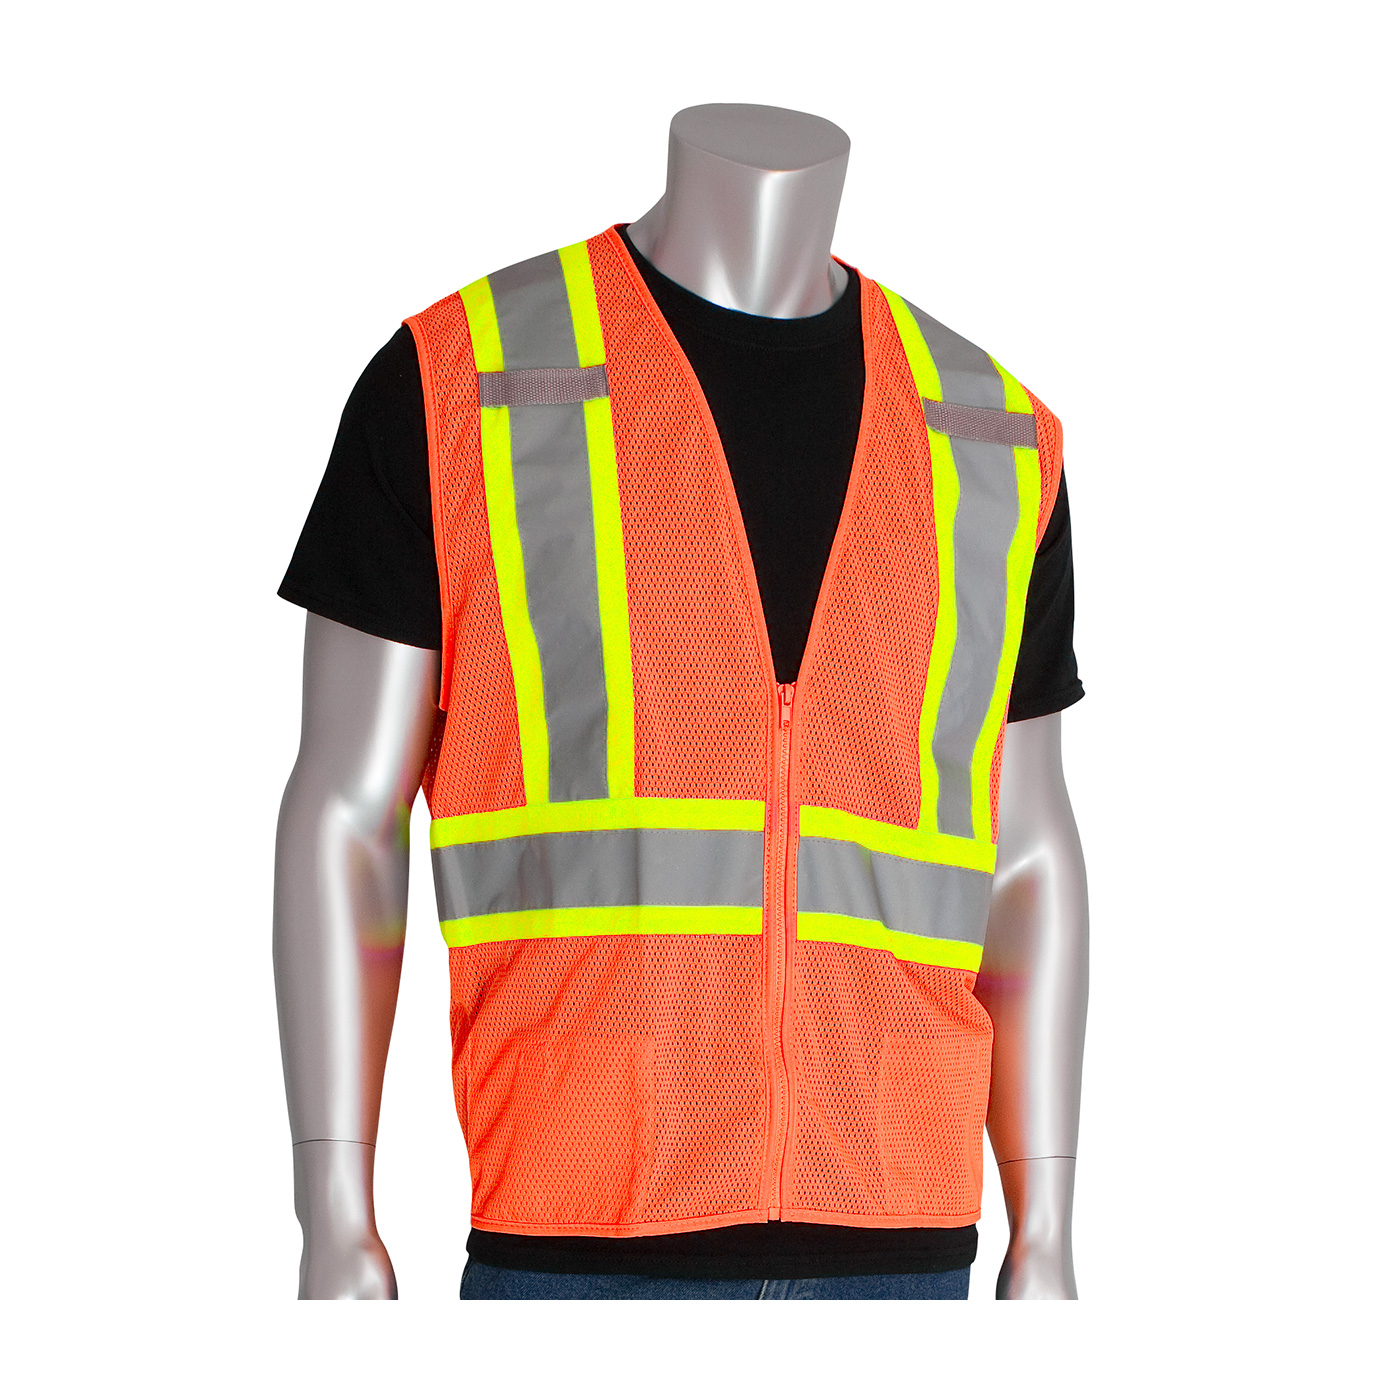 PIP® Type/Class R2 Two-Tone D-Ring Mesh Vests #302-0600D-OR